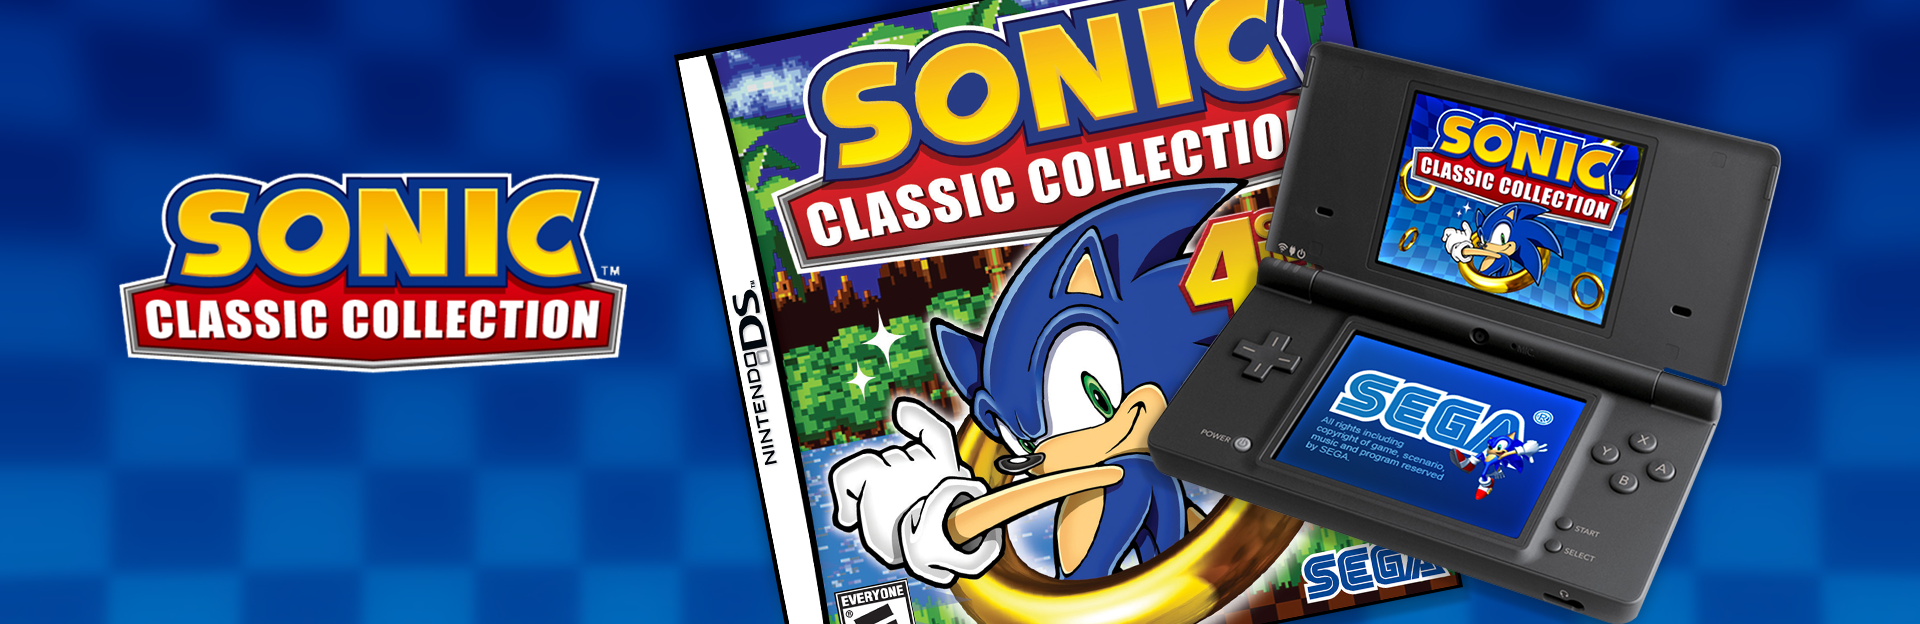 Sonic Classic Collection Nintendo DS Video Game Complete 